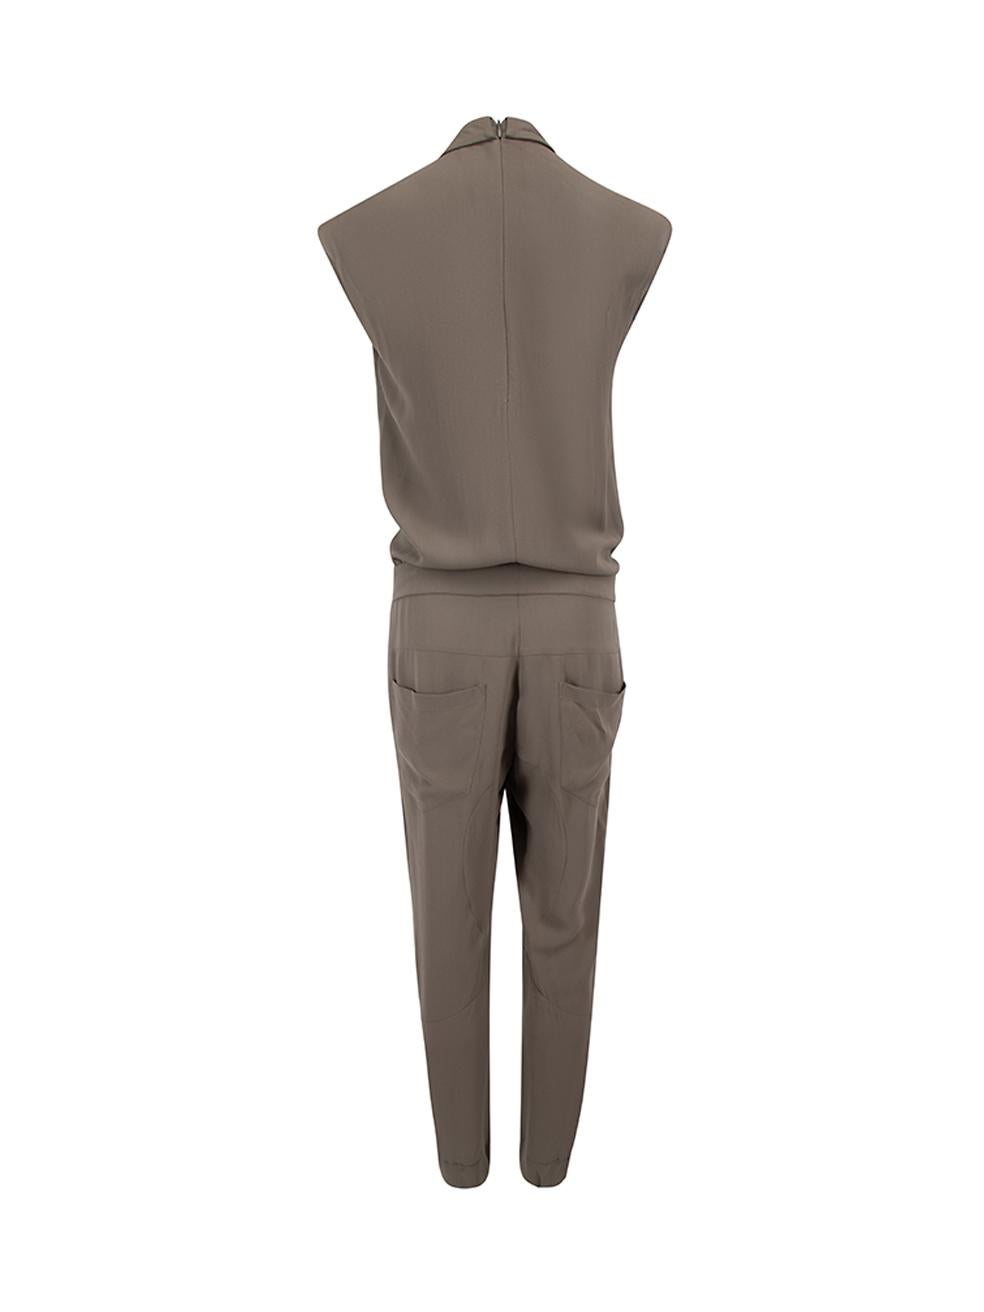 CONDITION is Very good. Hardly any visible wear to jumpsuit is evident. There is a small mark on the left shoulder on this used Brunello Cucinelli designer resale item. Details Brown Silk Sleeveless jumpsuit Elasticated waistband and leg hem Square